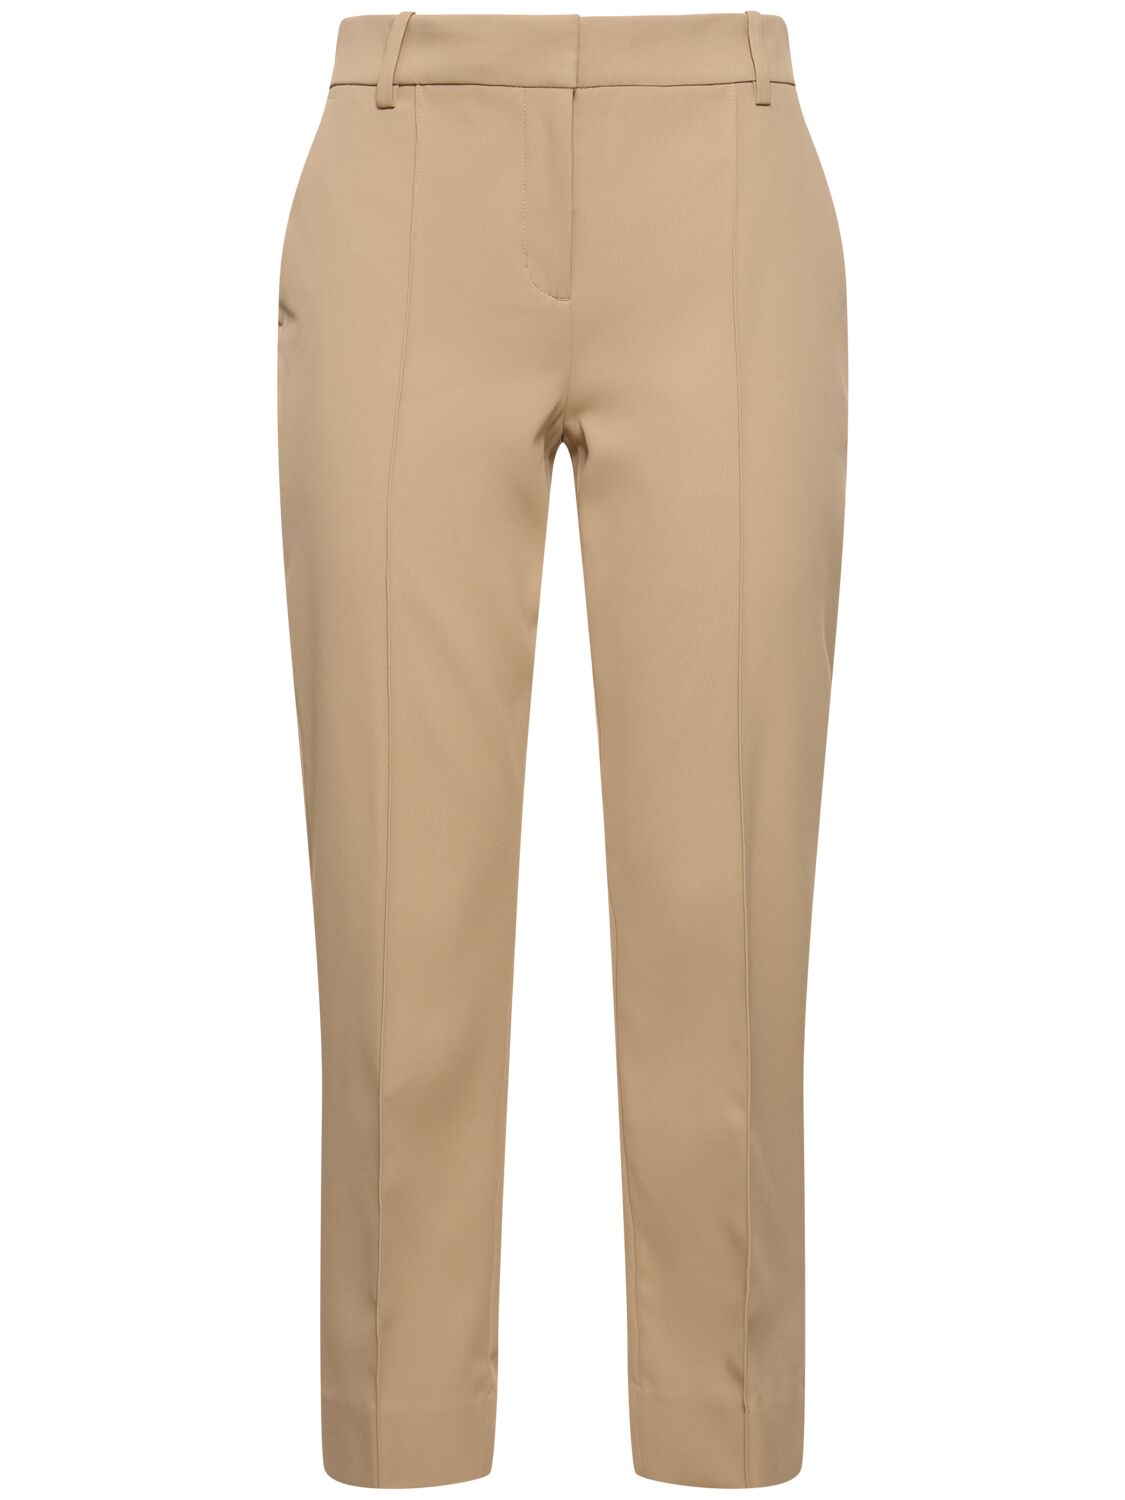 Tory Sport Technical Twill Golf Pants In Brown